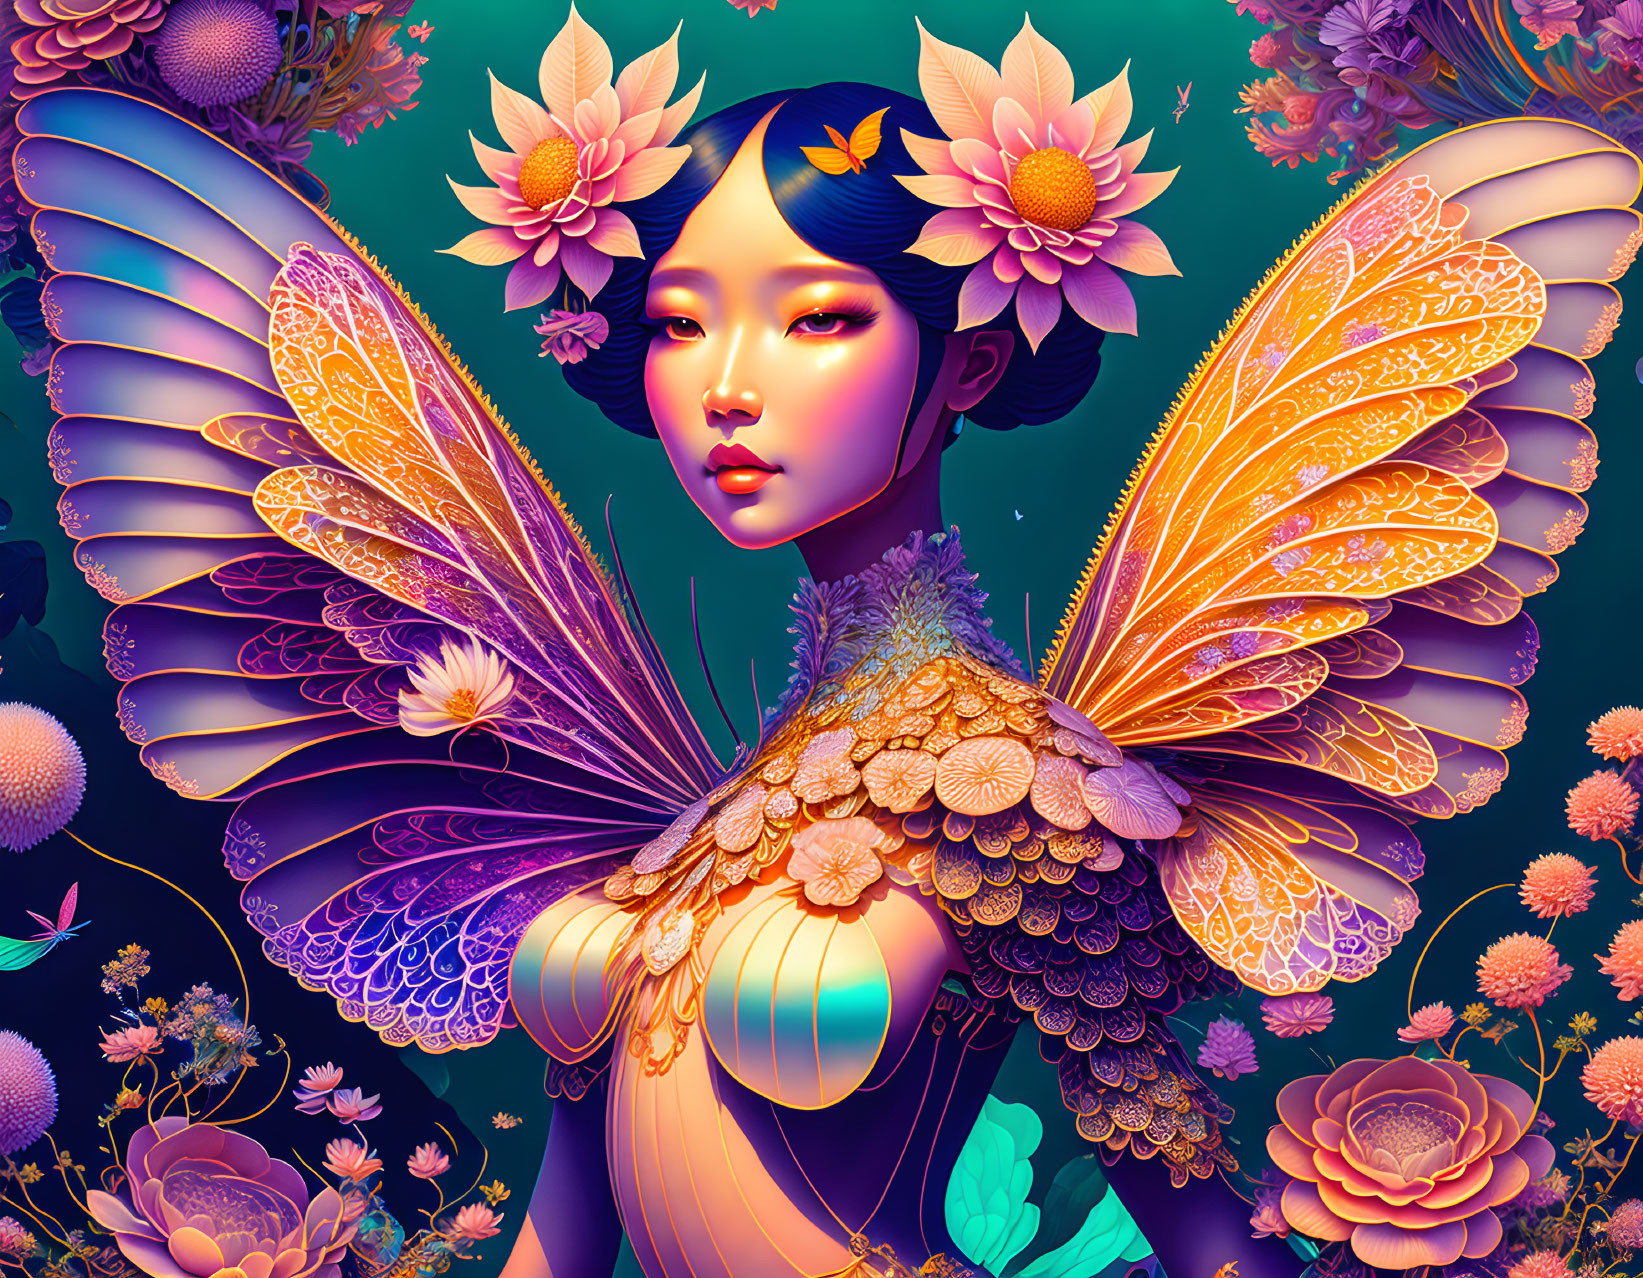 Digital Artwork: Woman with Butterfly Wings in Colorful, Fantastical Setting